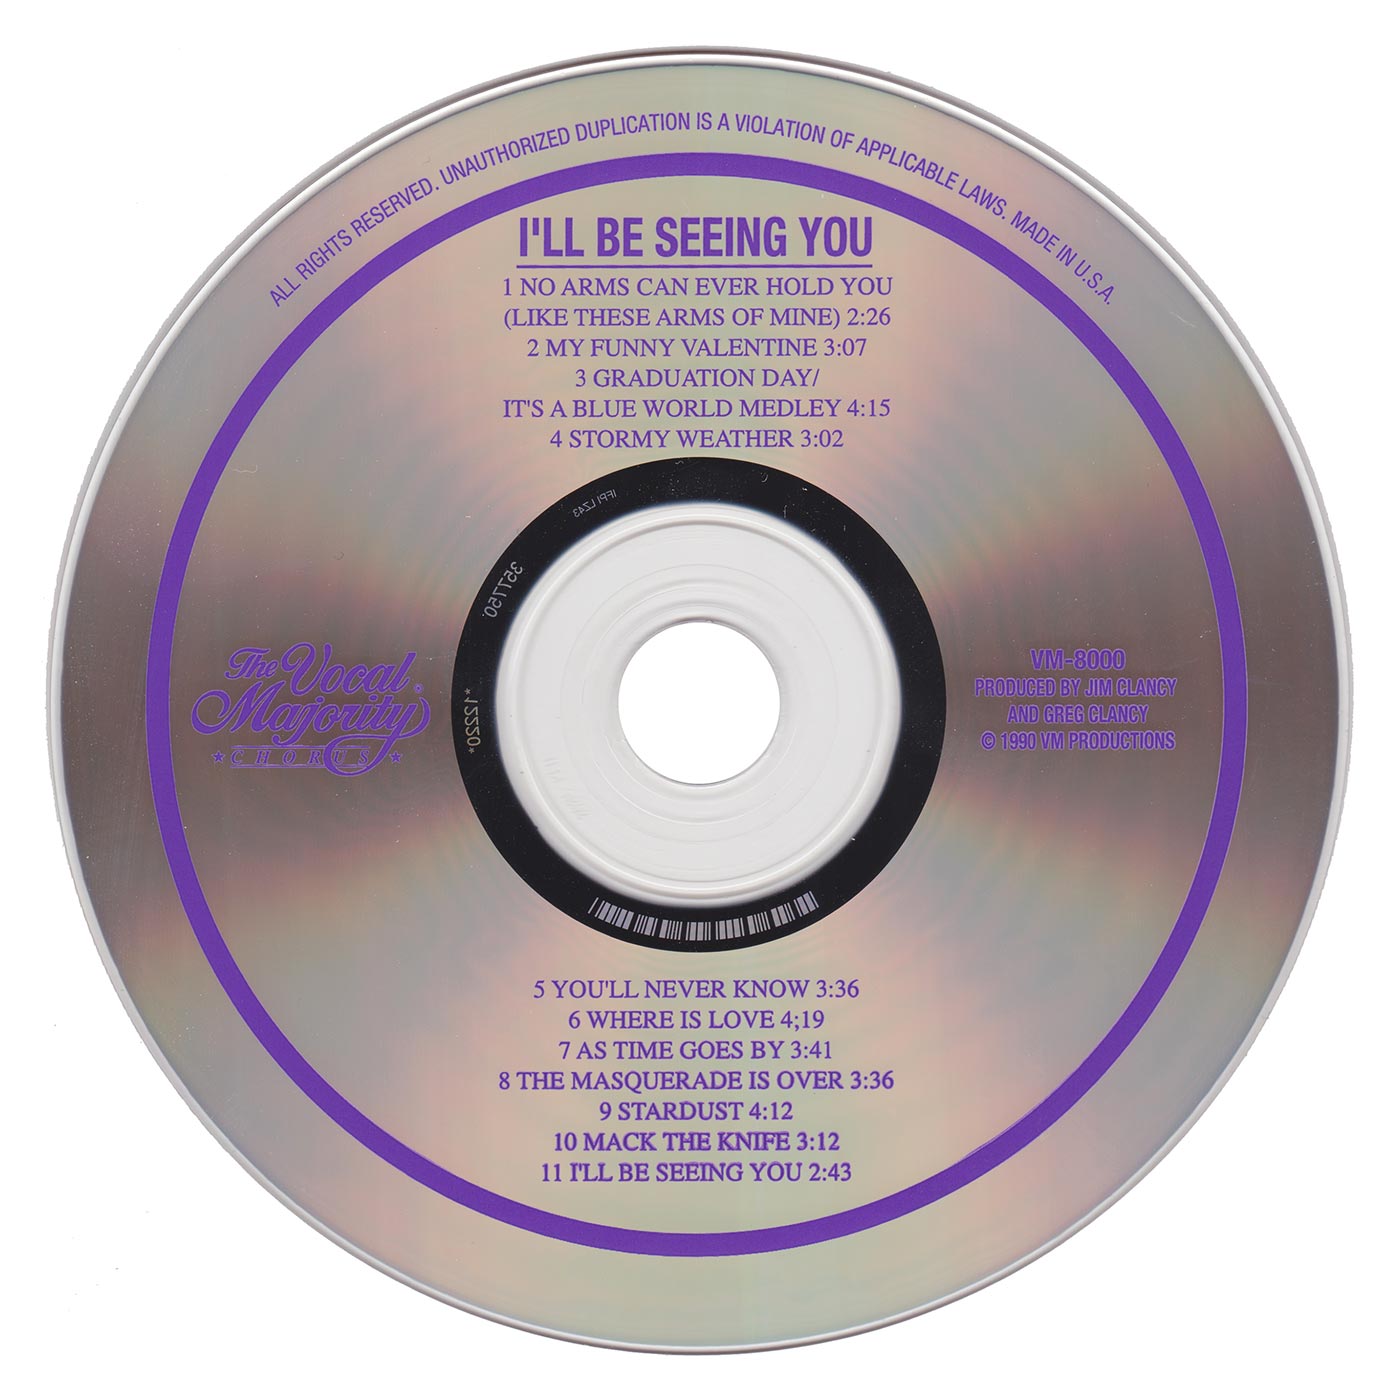 Disc Art: I'll Be Seeing You